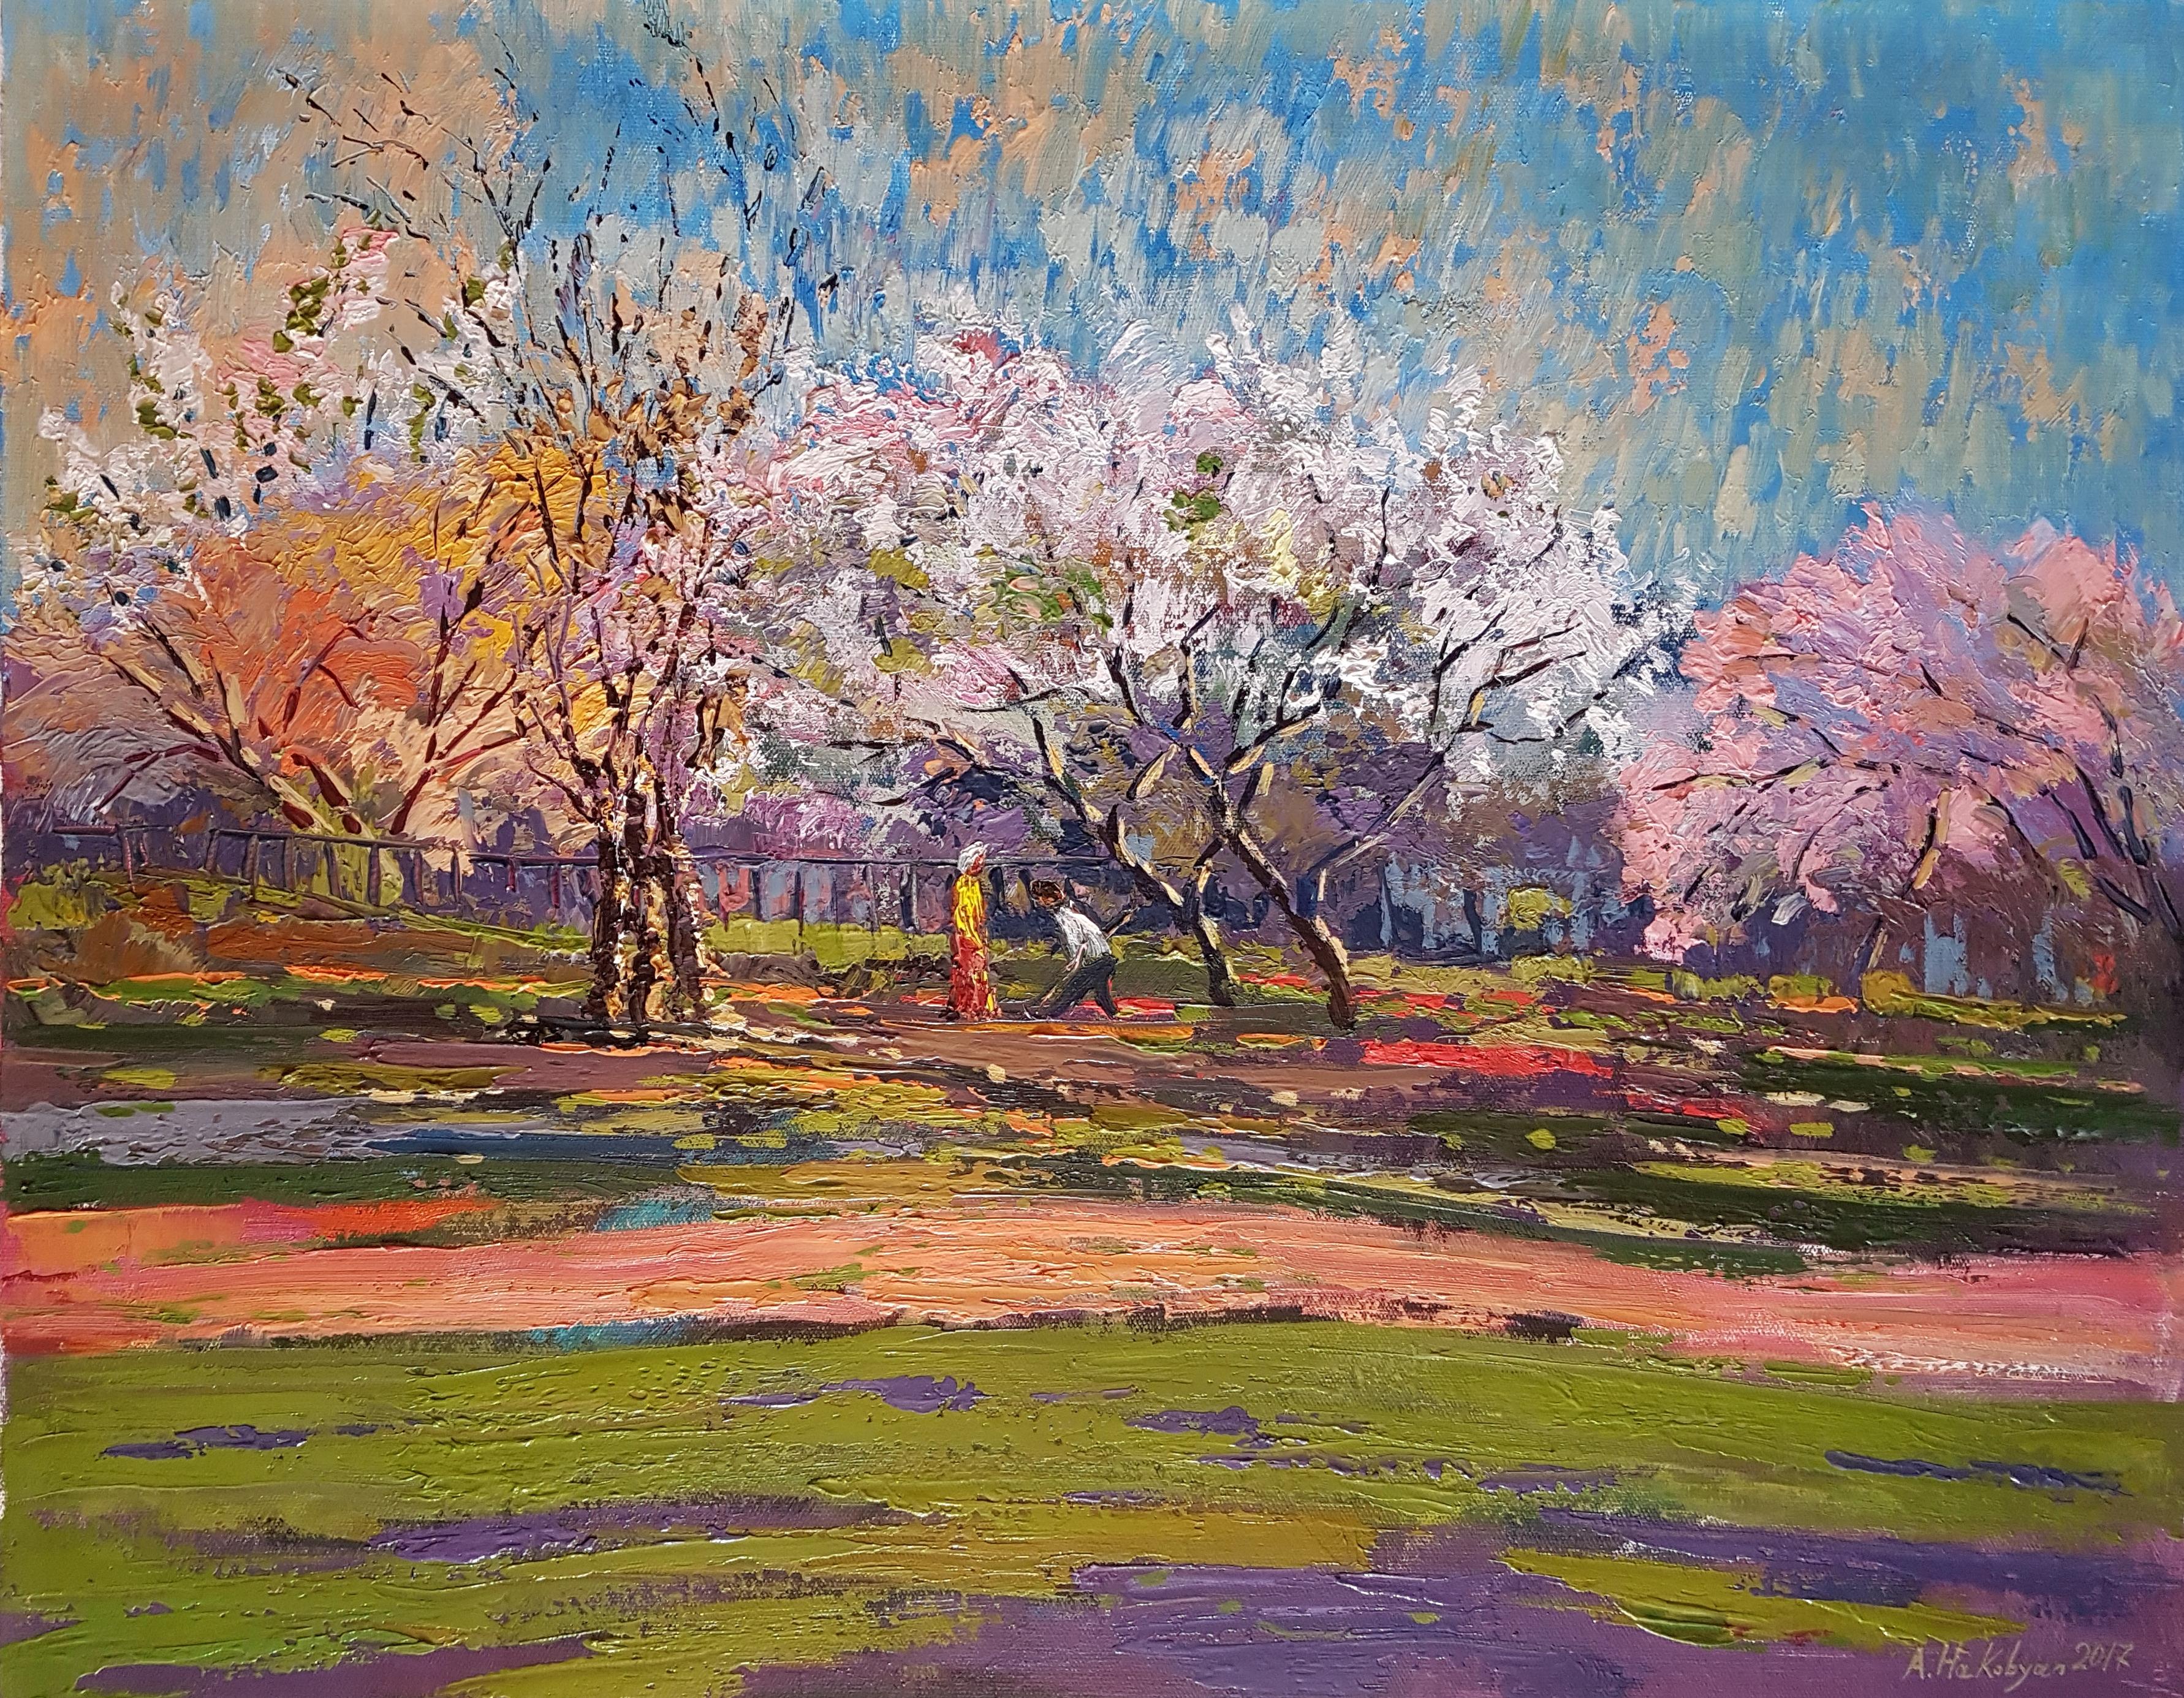 Ara H. Hakobyan Landscape Painting - In the Garden, Blossom trees Impressionism, Original oil Painting, One of a Kind